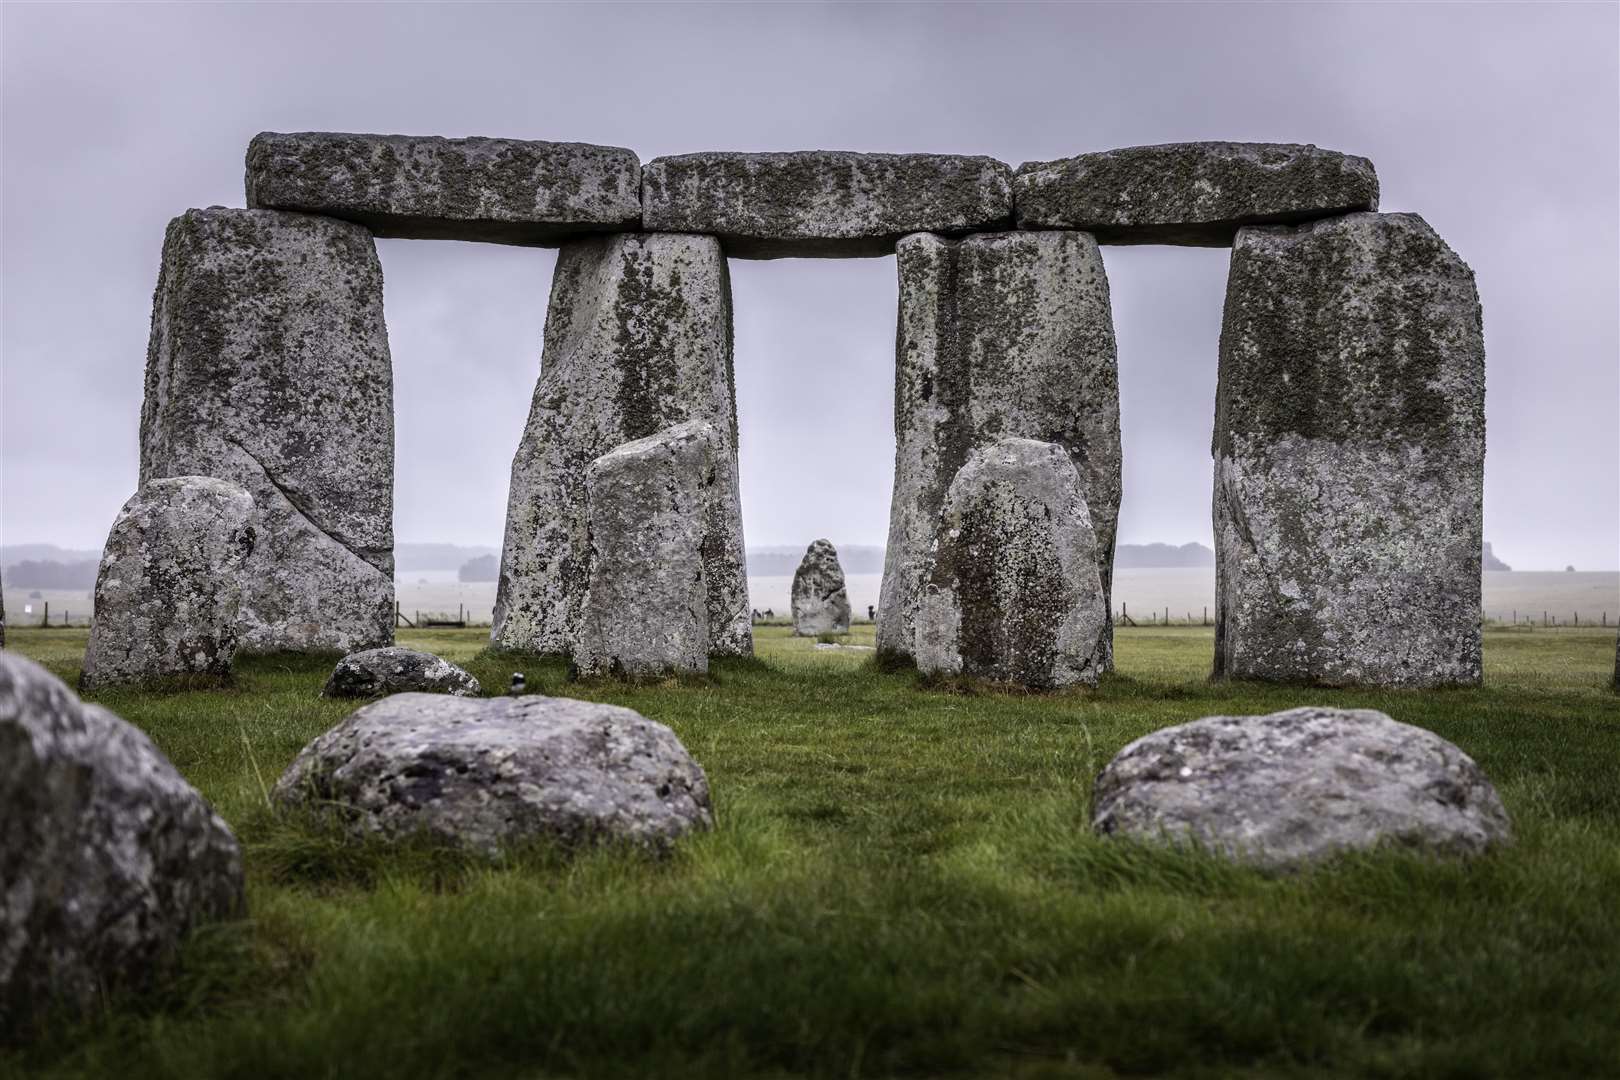 Handout photo issued by English Heritage of Stonehenge in Wiltshire, during a soggy start in 2020. (Christopher Ison/English Heritage/PA)